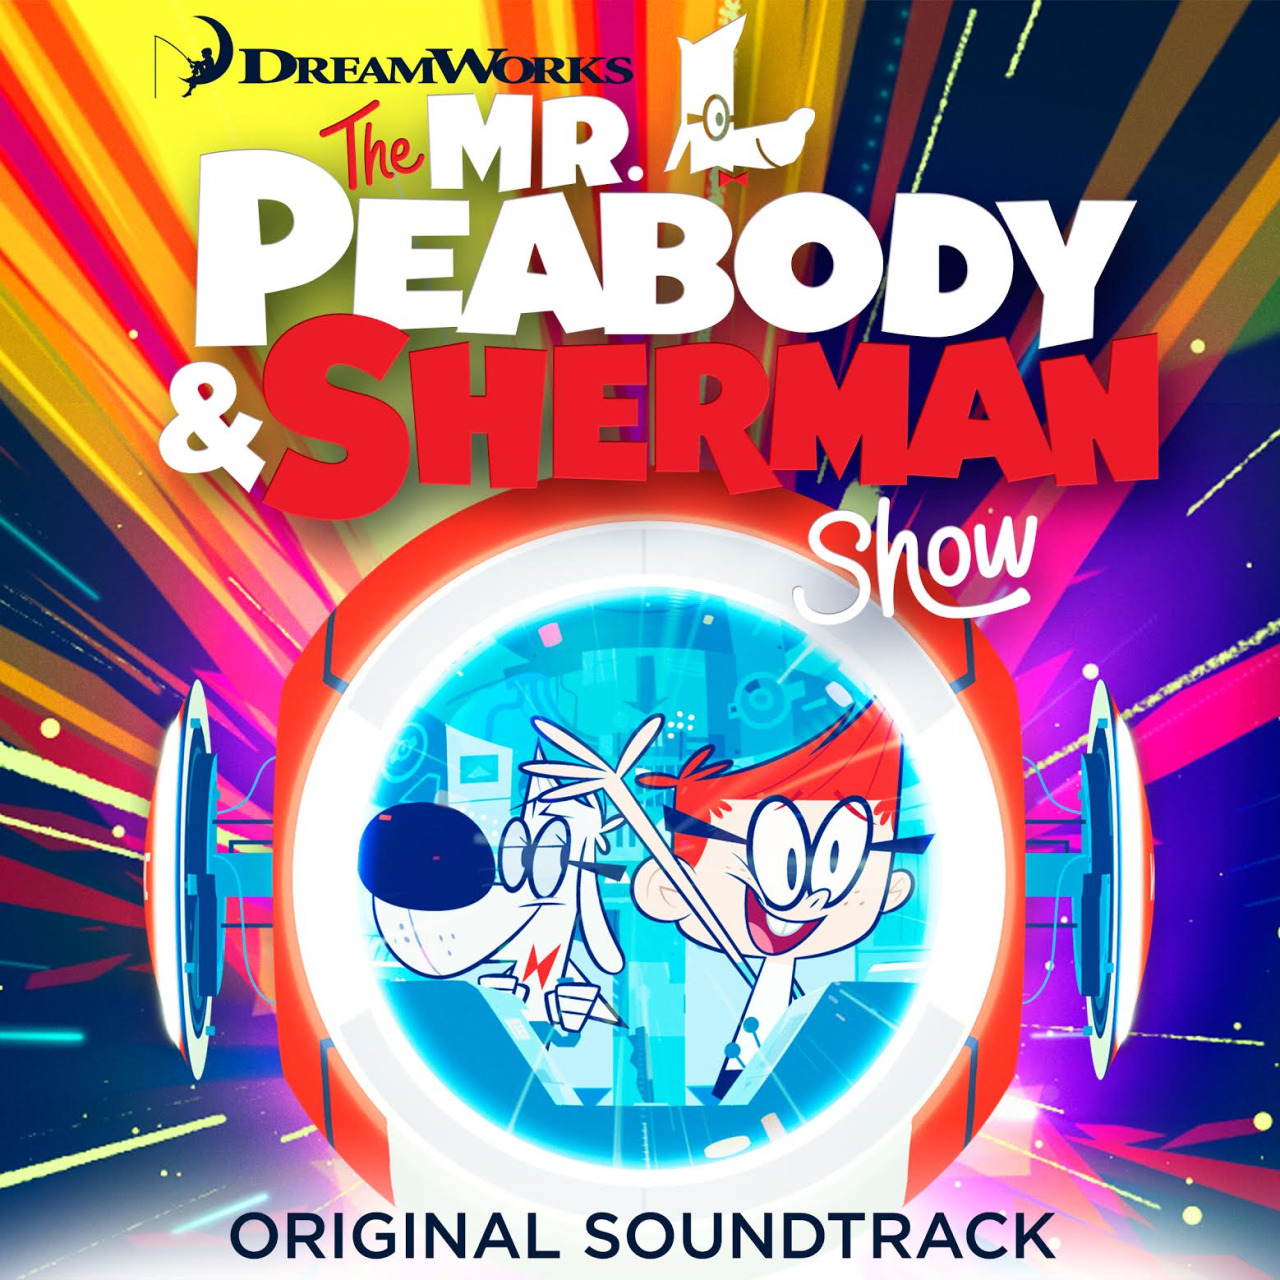 The Mr. Peabody and Sherman Show soundtrack